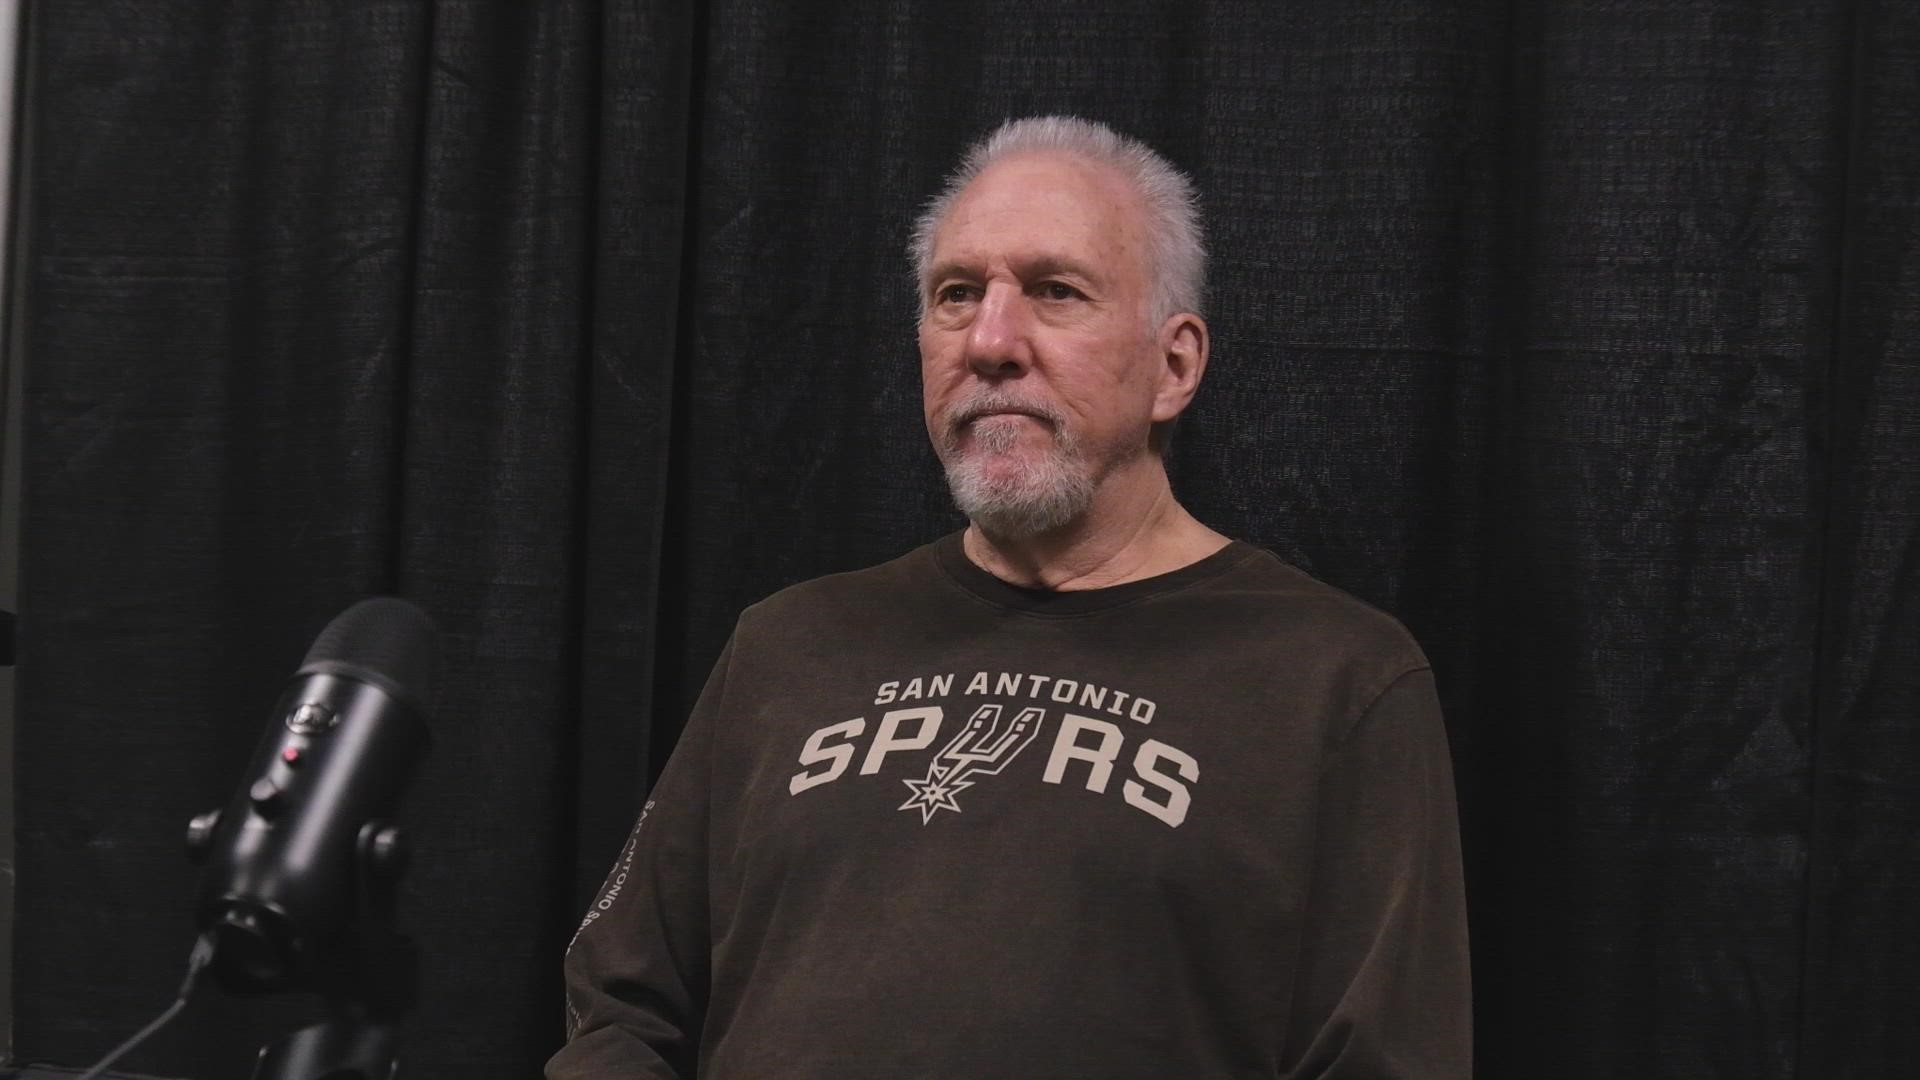 Pop spoke about Borrego's ability to be genuine and build a culture of accountability, kindness and competitiveness.